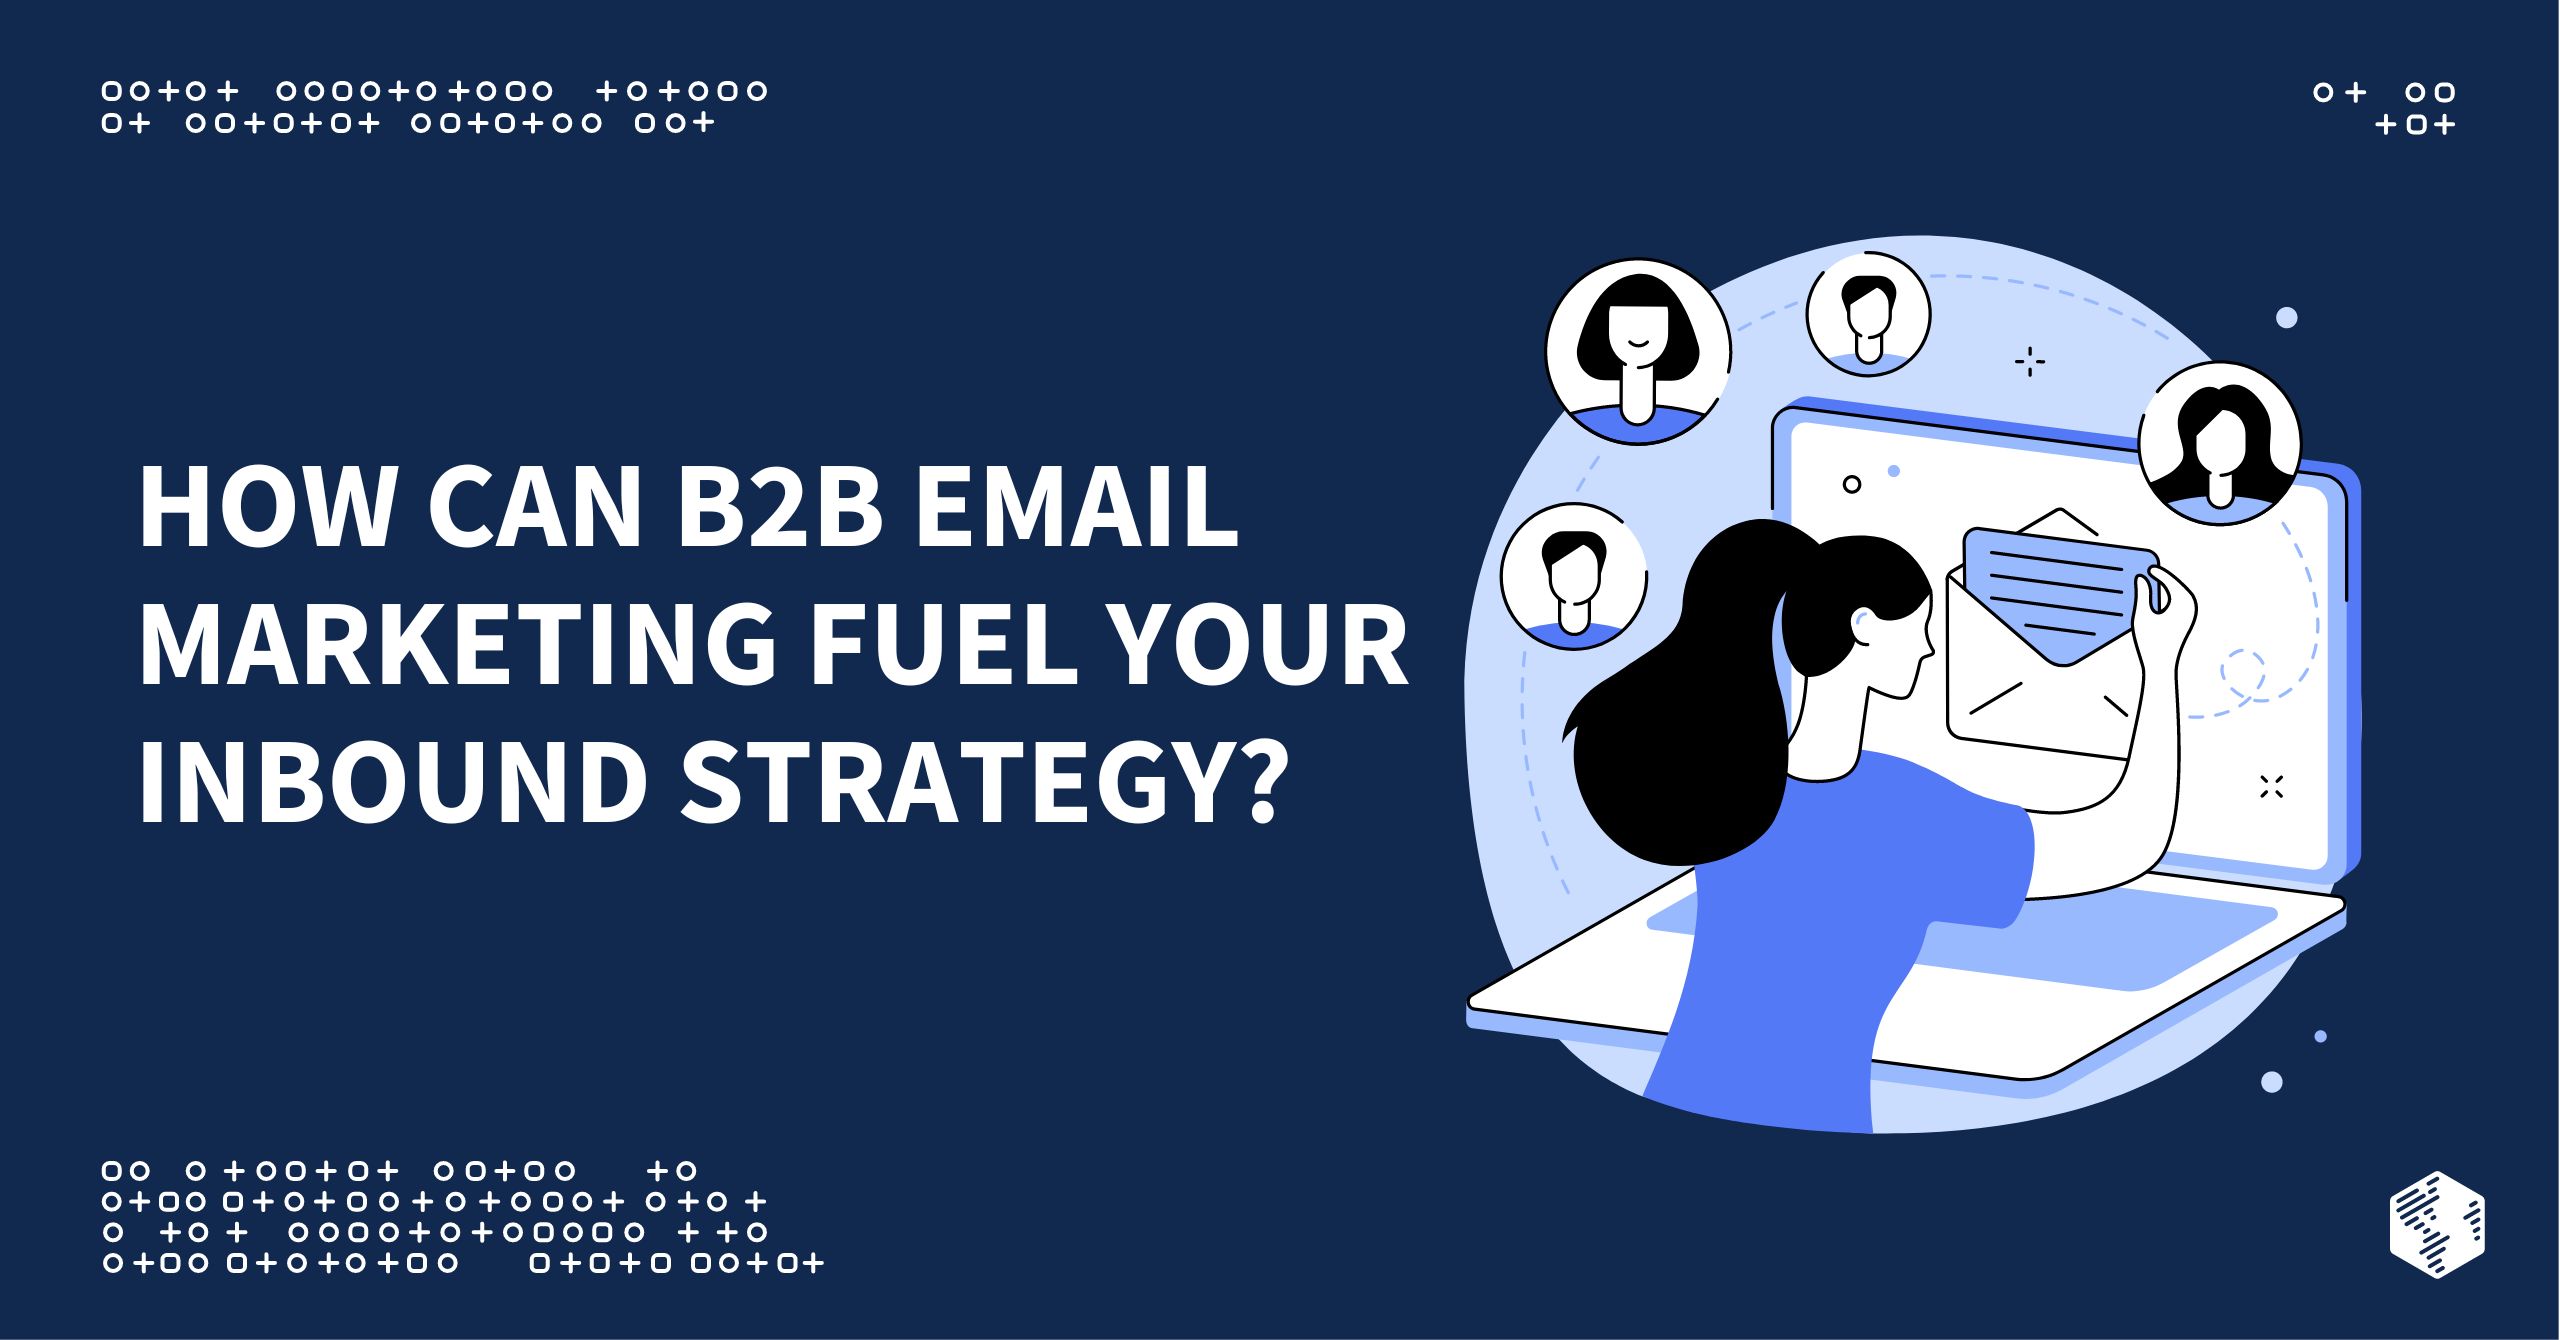 How Can B2B Email Marketing Fuel Your Overall Inbound Strategy